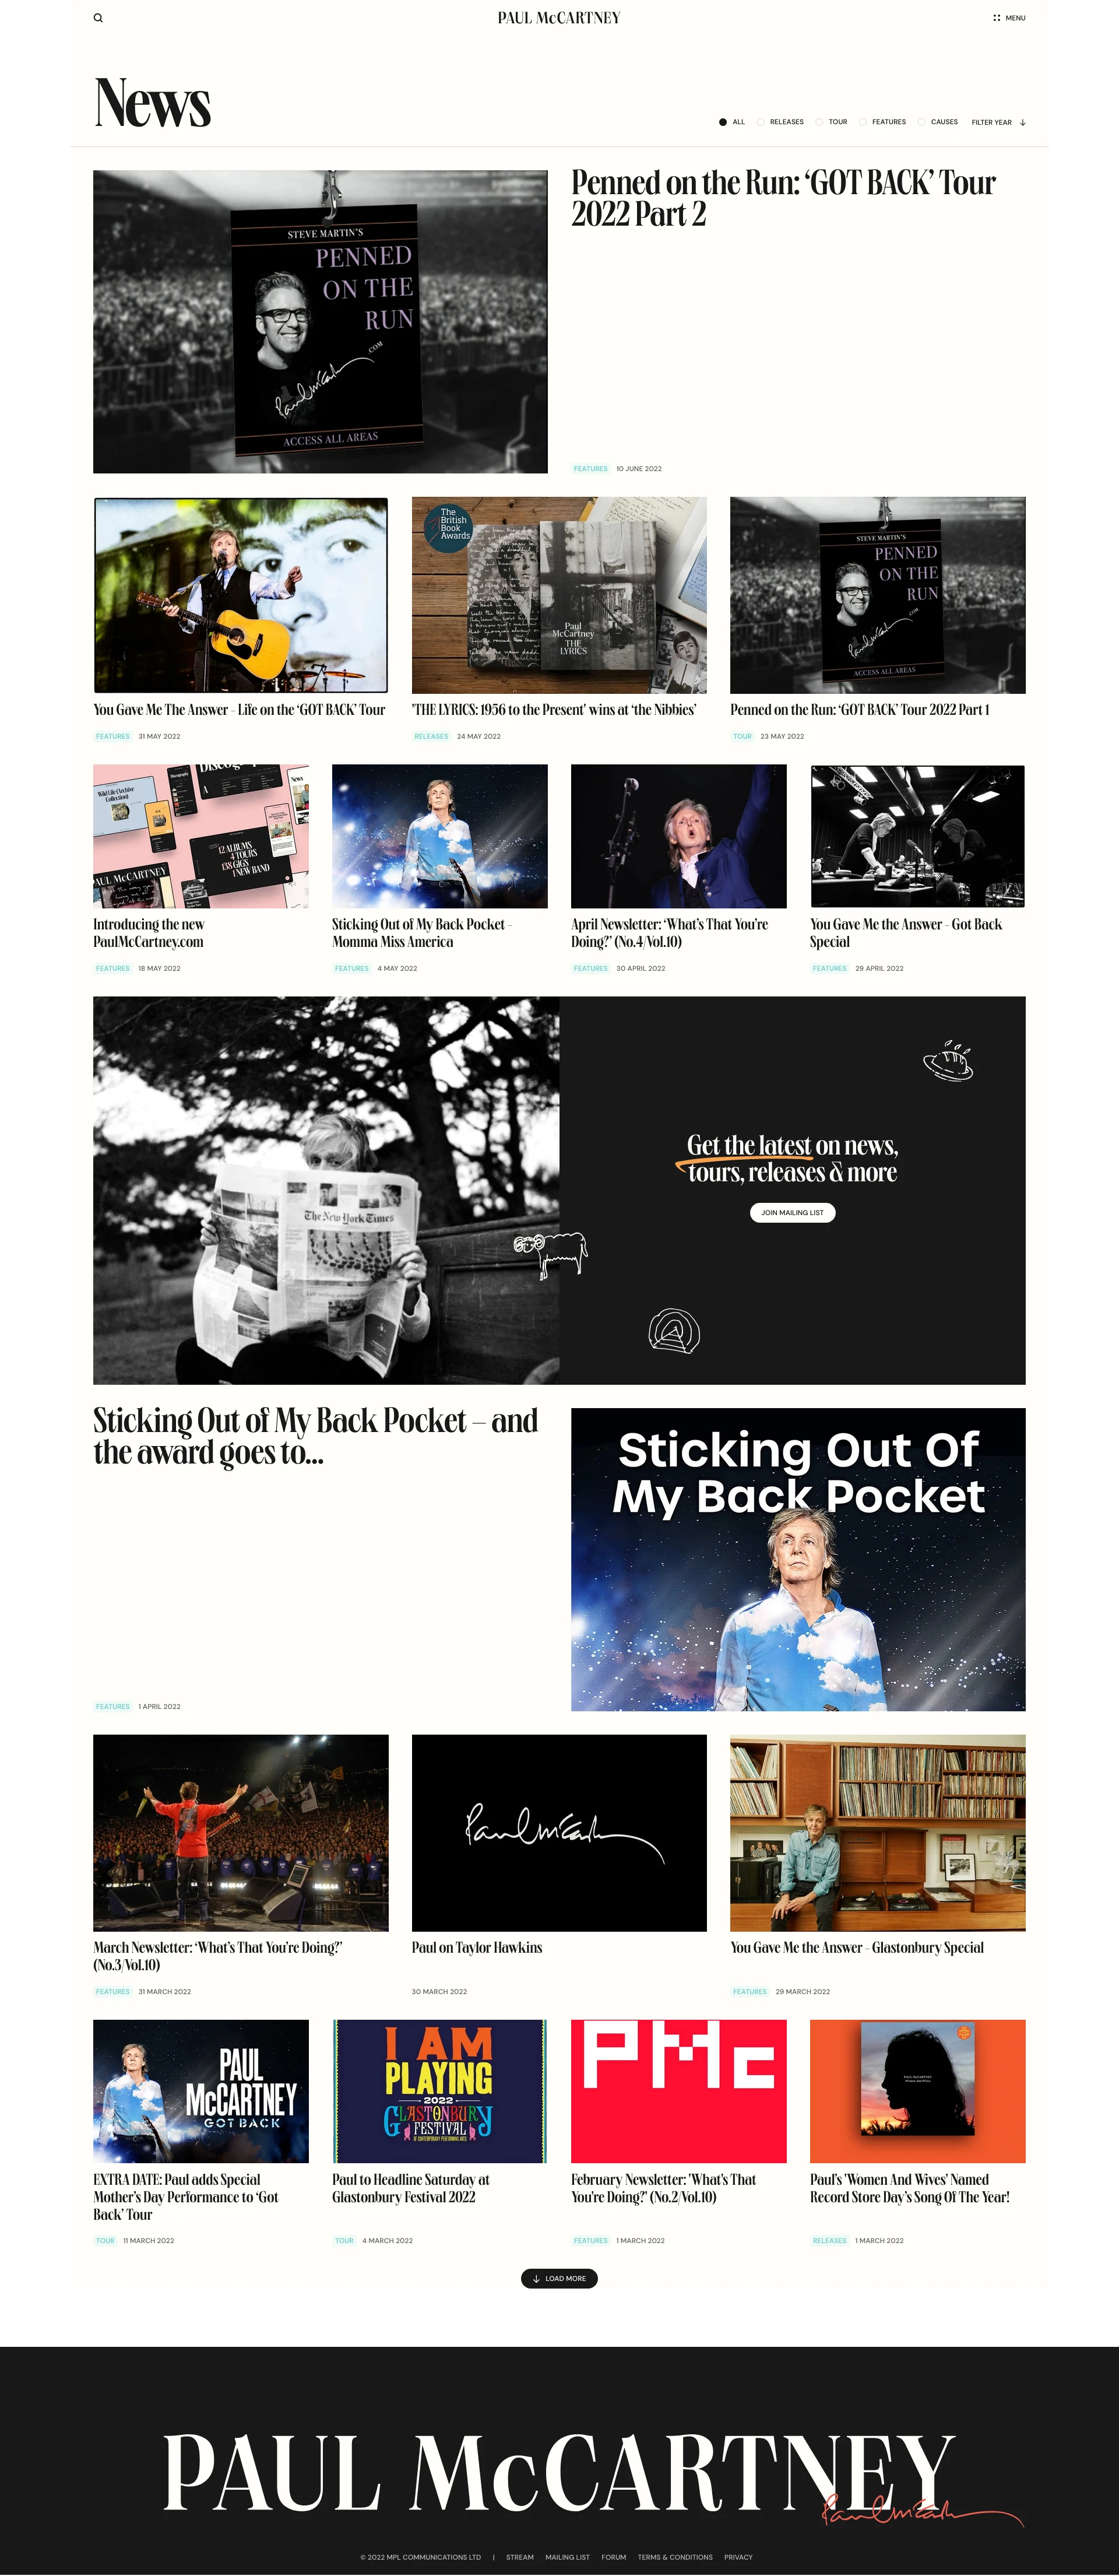 Paul McCartney Landing Page Example: Explore Paul McCartney’s life and career, decade by decade, from the 1970s onwards